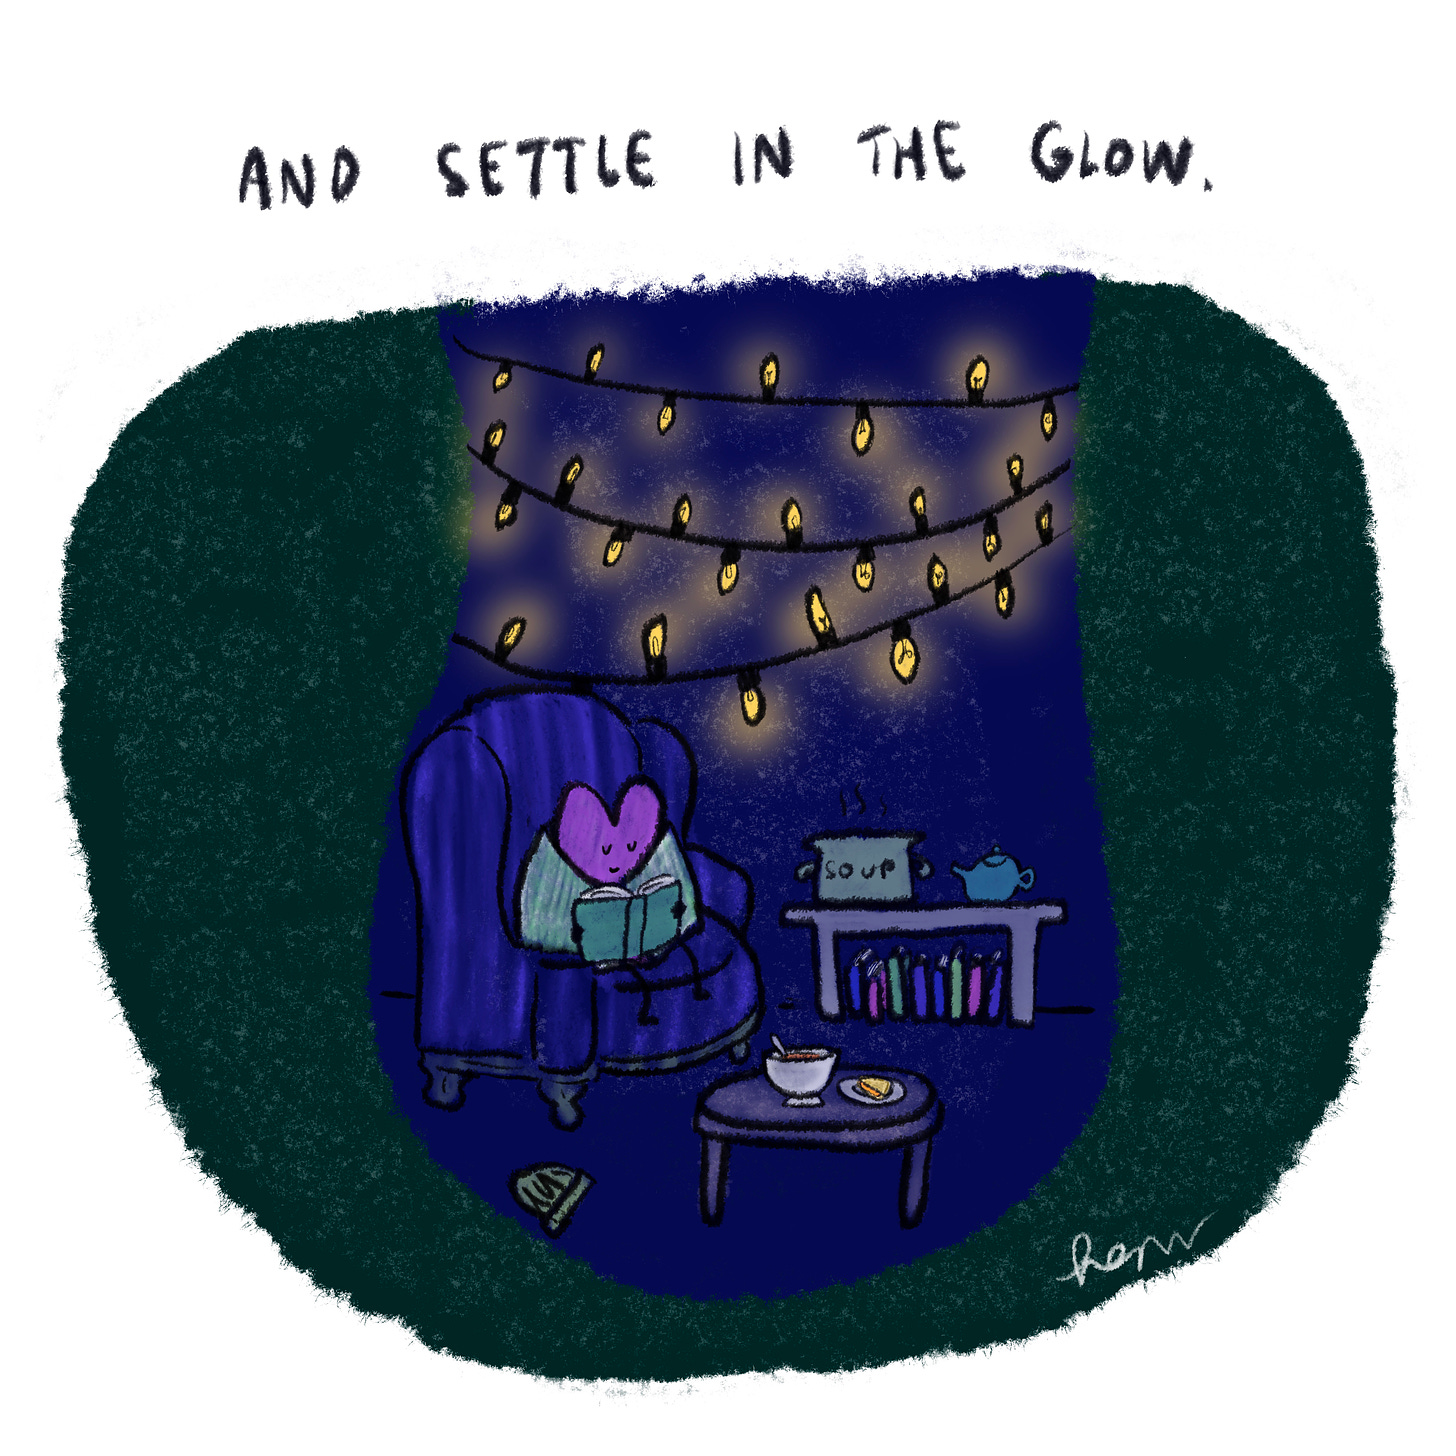 So I try to go into the dark with little bright spots to make the season glow a little, as if I’d strung fairy lights across the walls. 